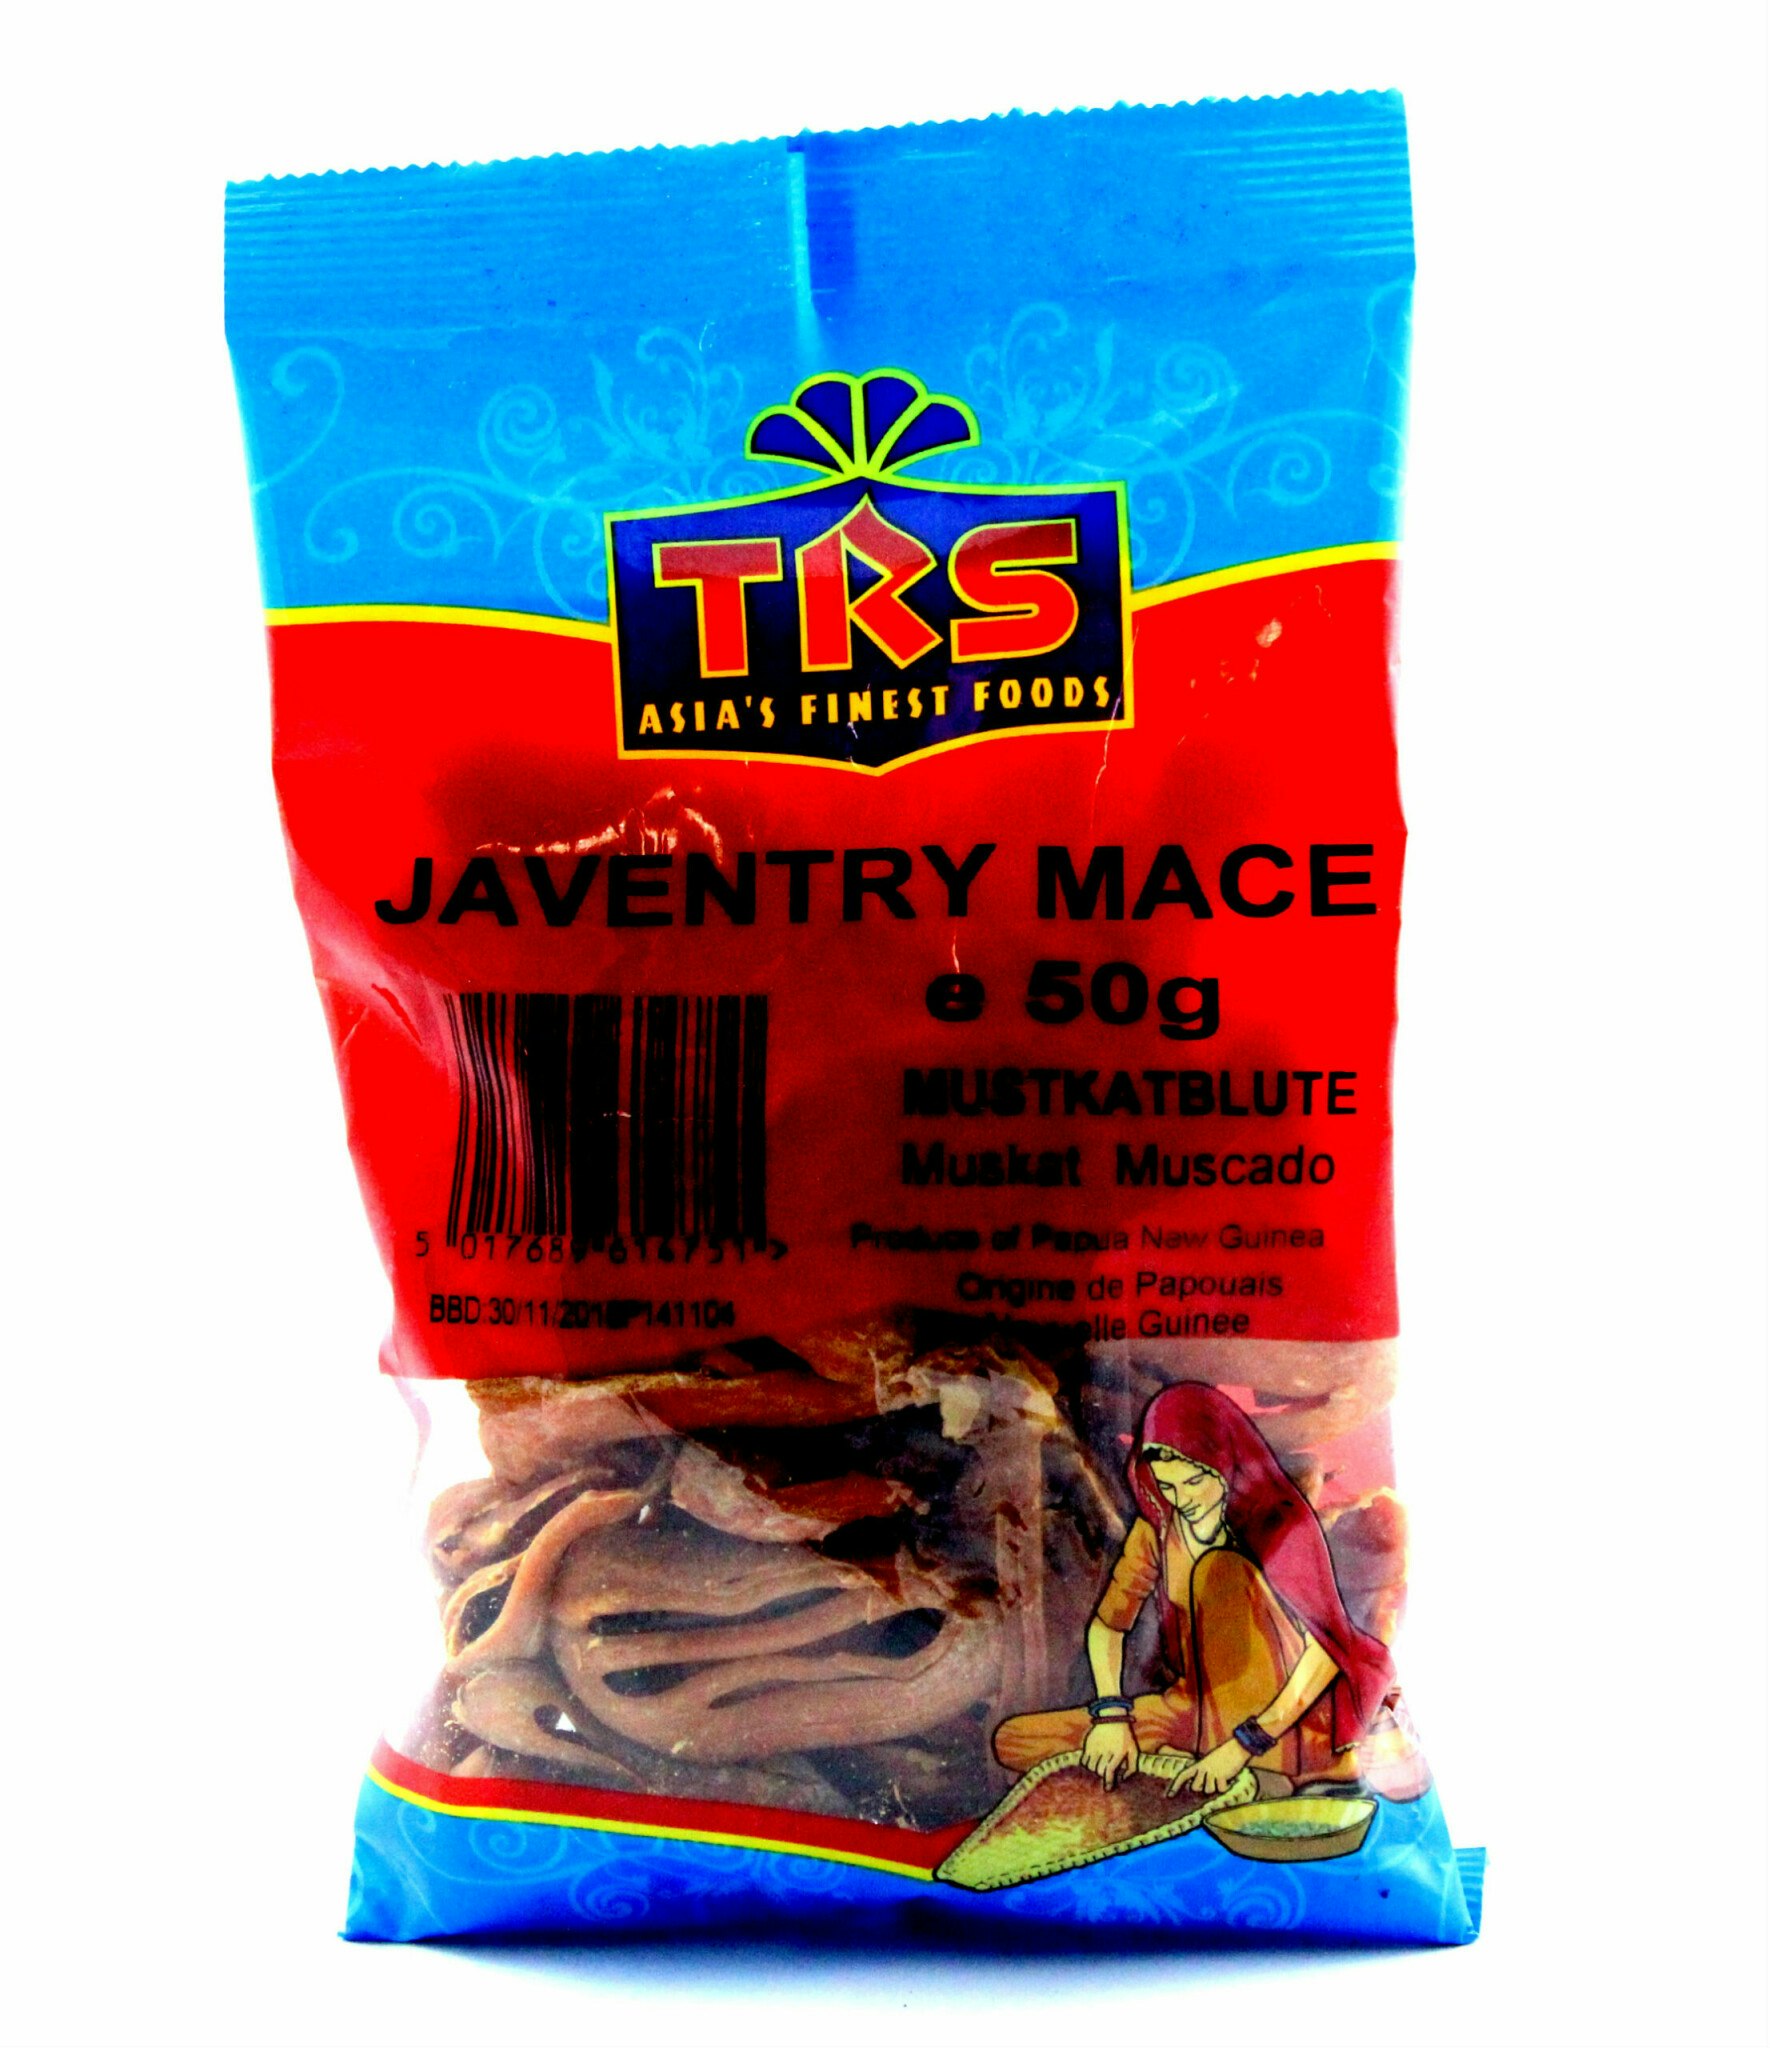 Javentry (Mace) (TRS) 50g